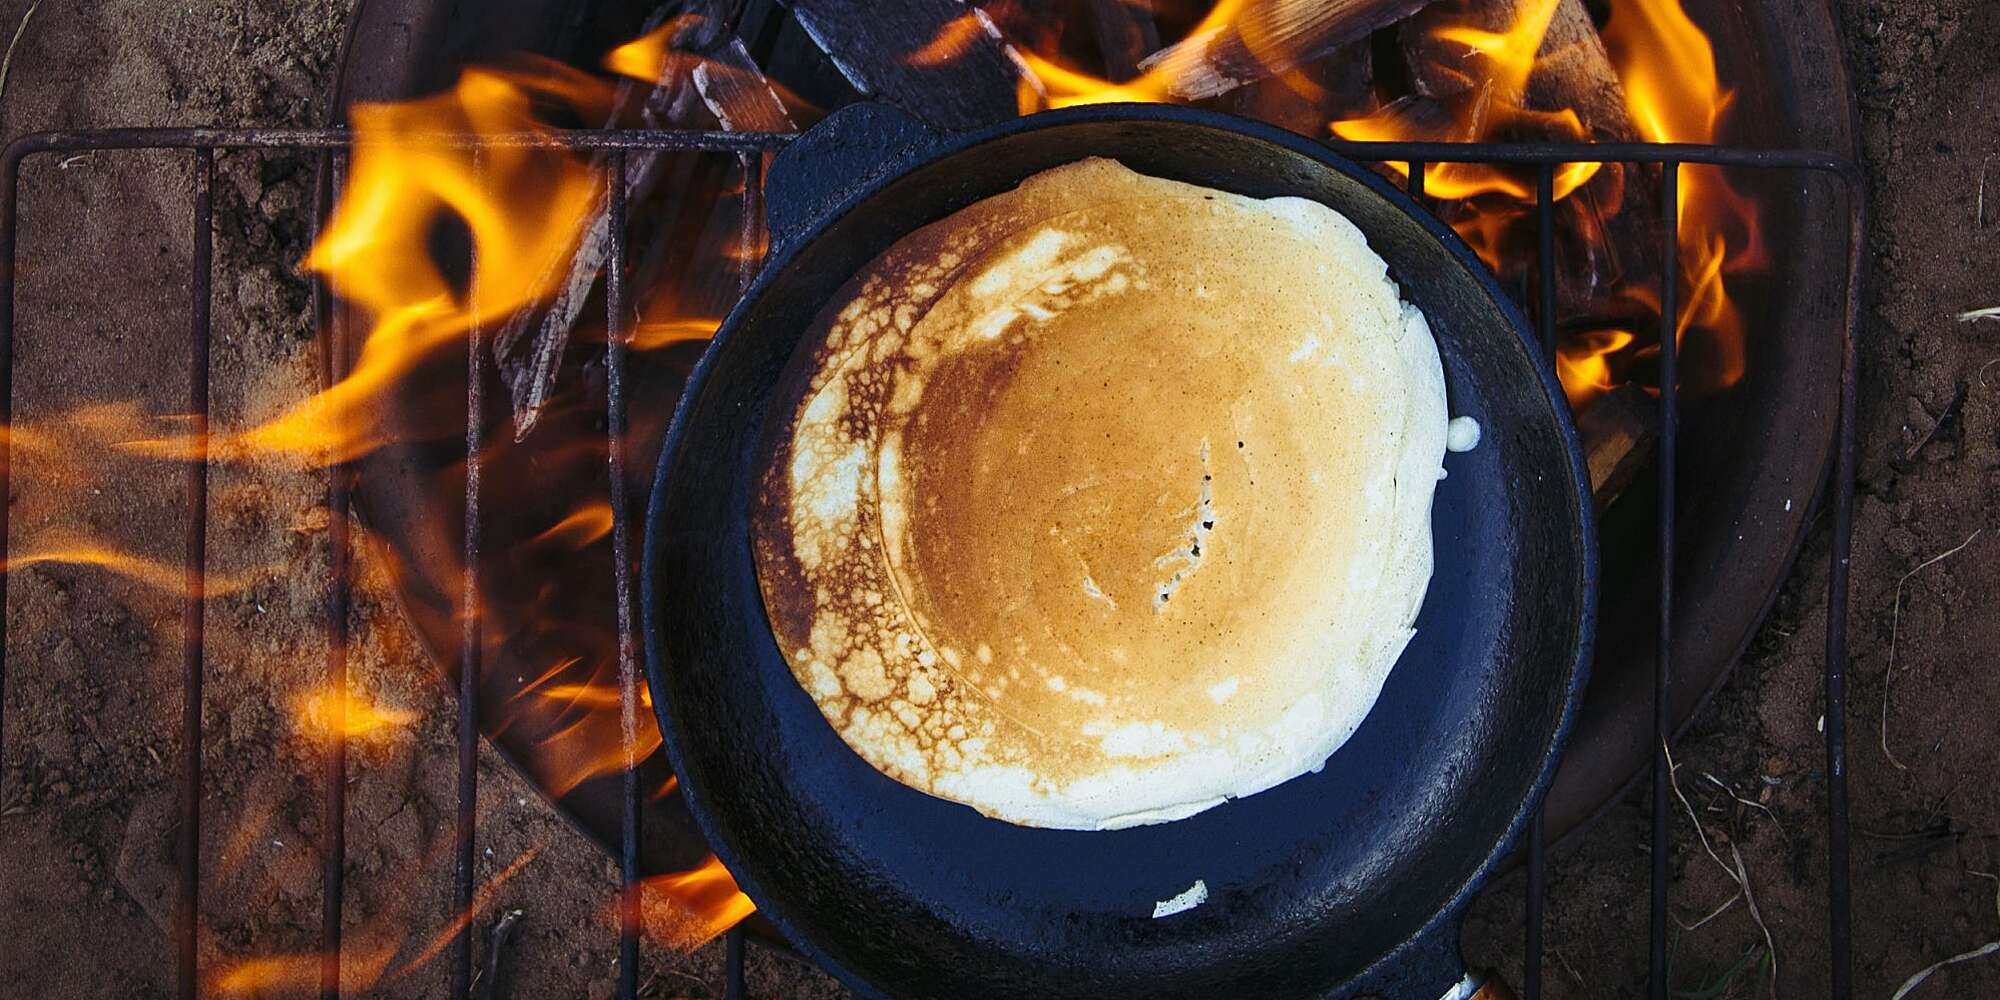 Pancakes on my new grill pan! - market recipes